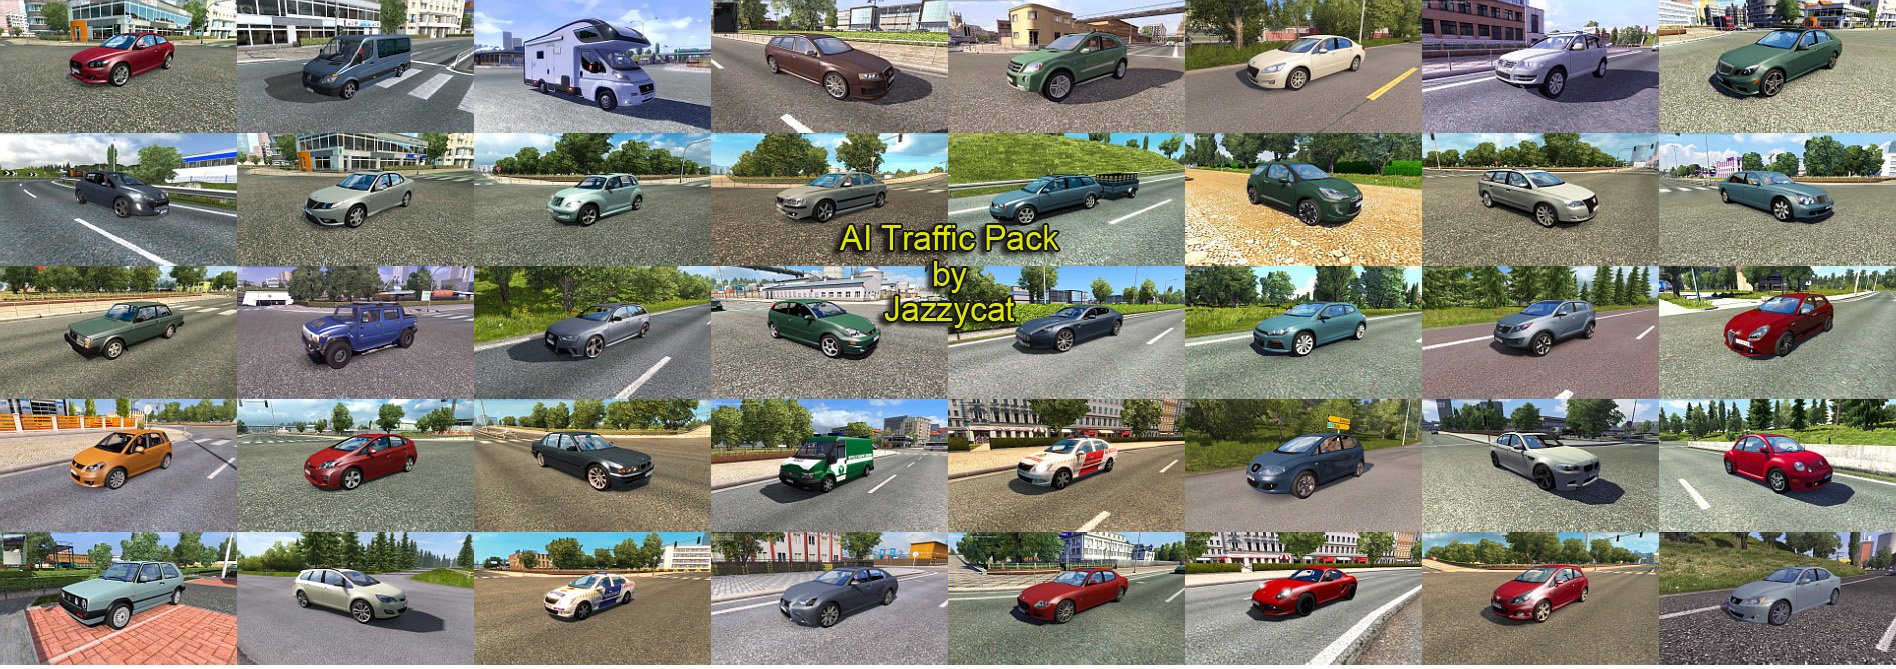 AI Traffic Pack v3.9 by Jazzycat